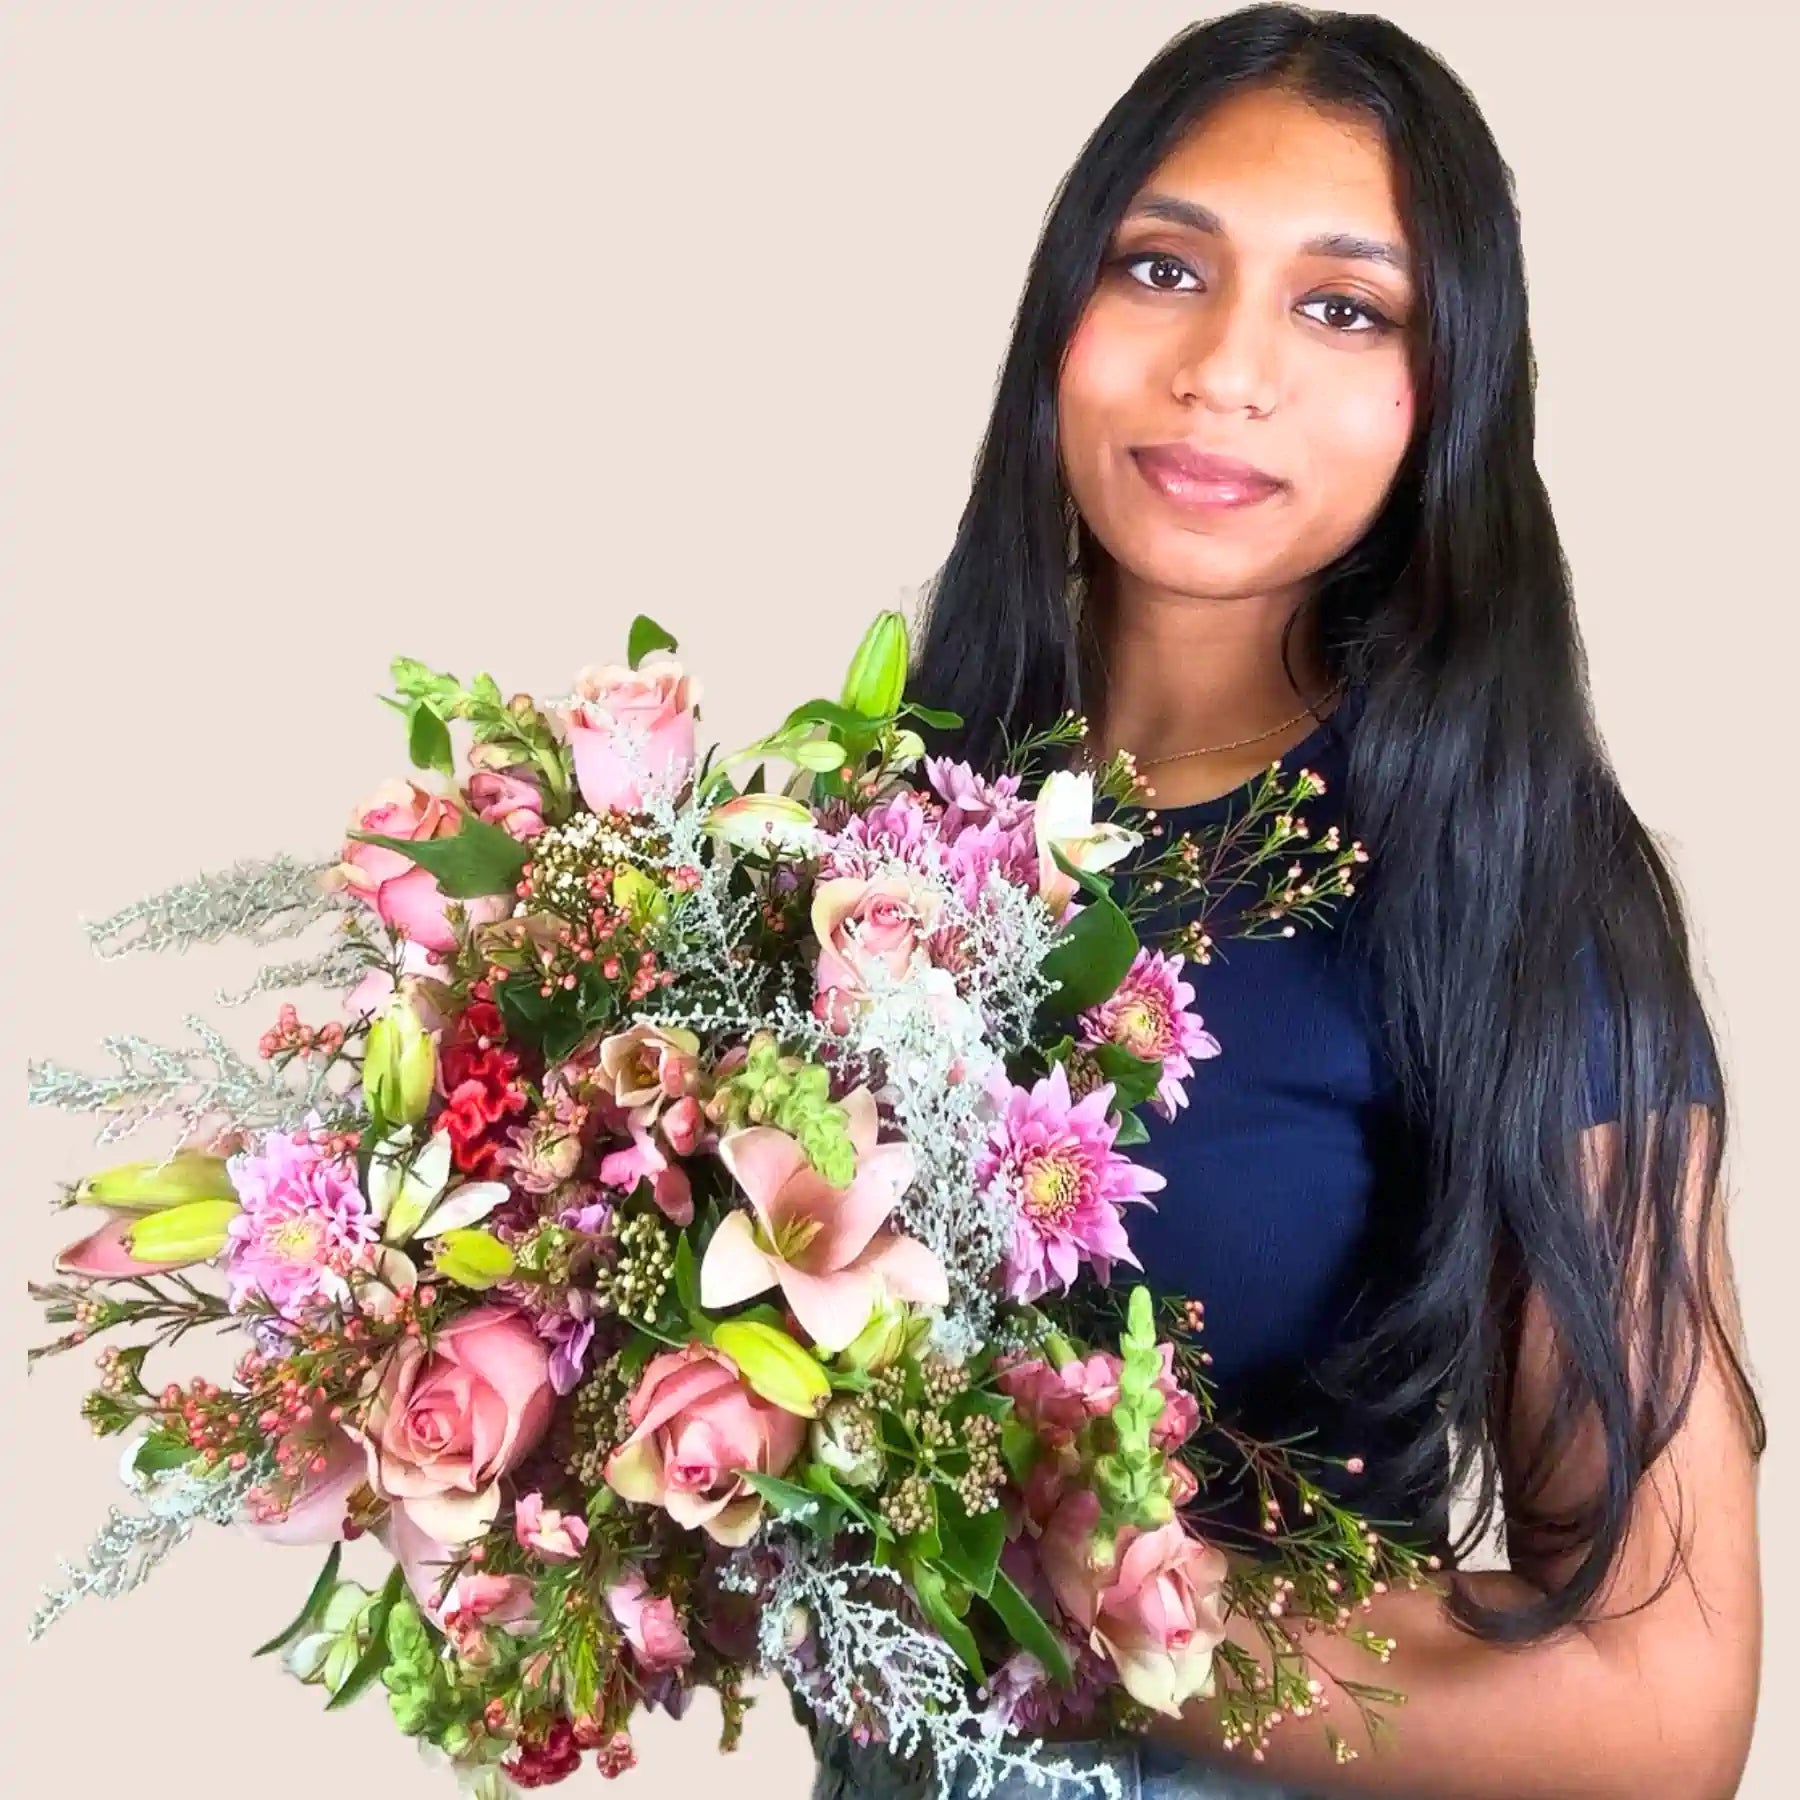 A smiling woman holding a stunning bouquet of mixed pink and white flowers, featuring roses, lilies, and assorted greenery. Bella’s Flower Bouquet. Fabulous Flowers and Gifts.